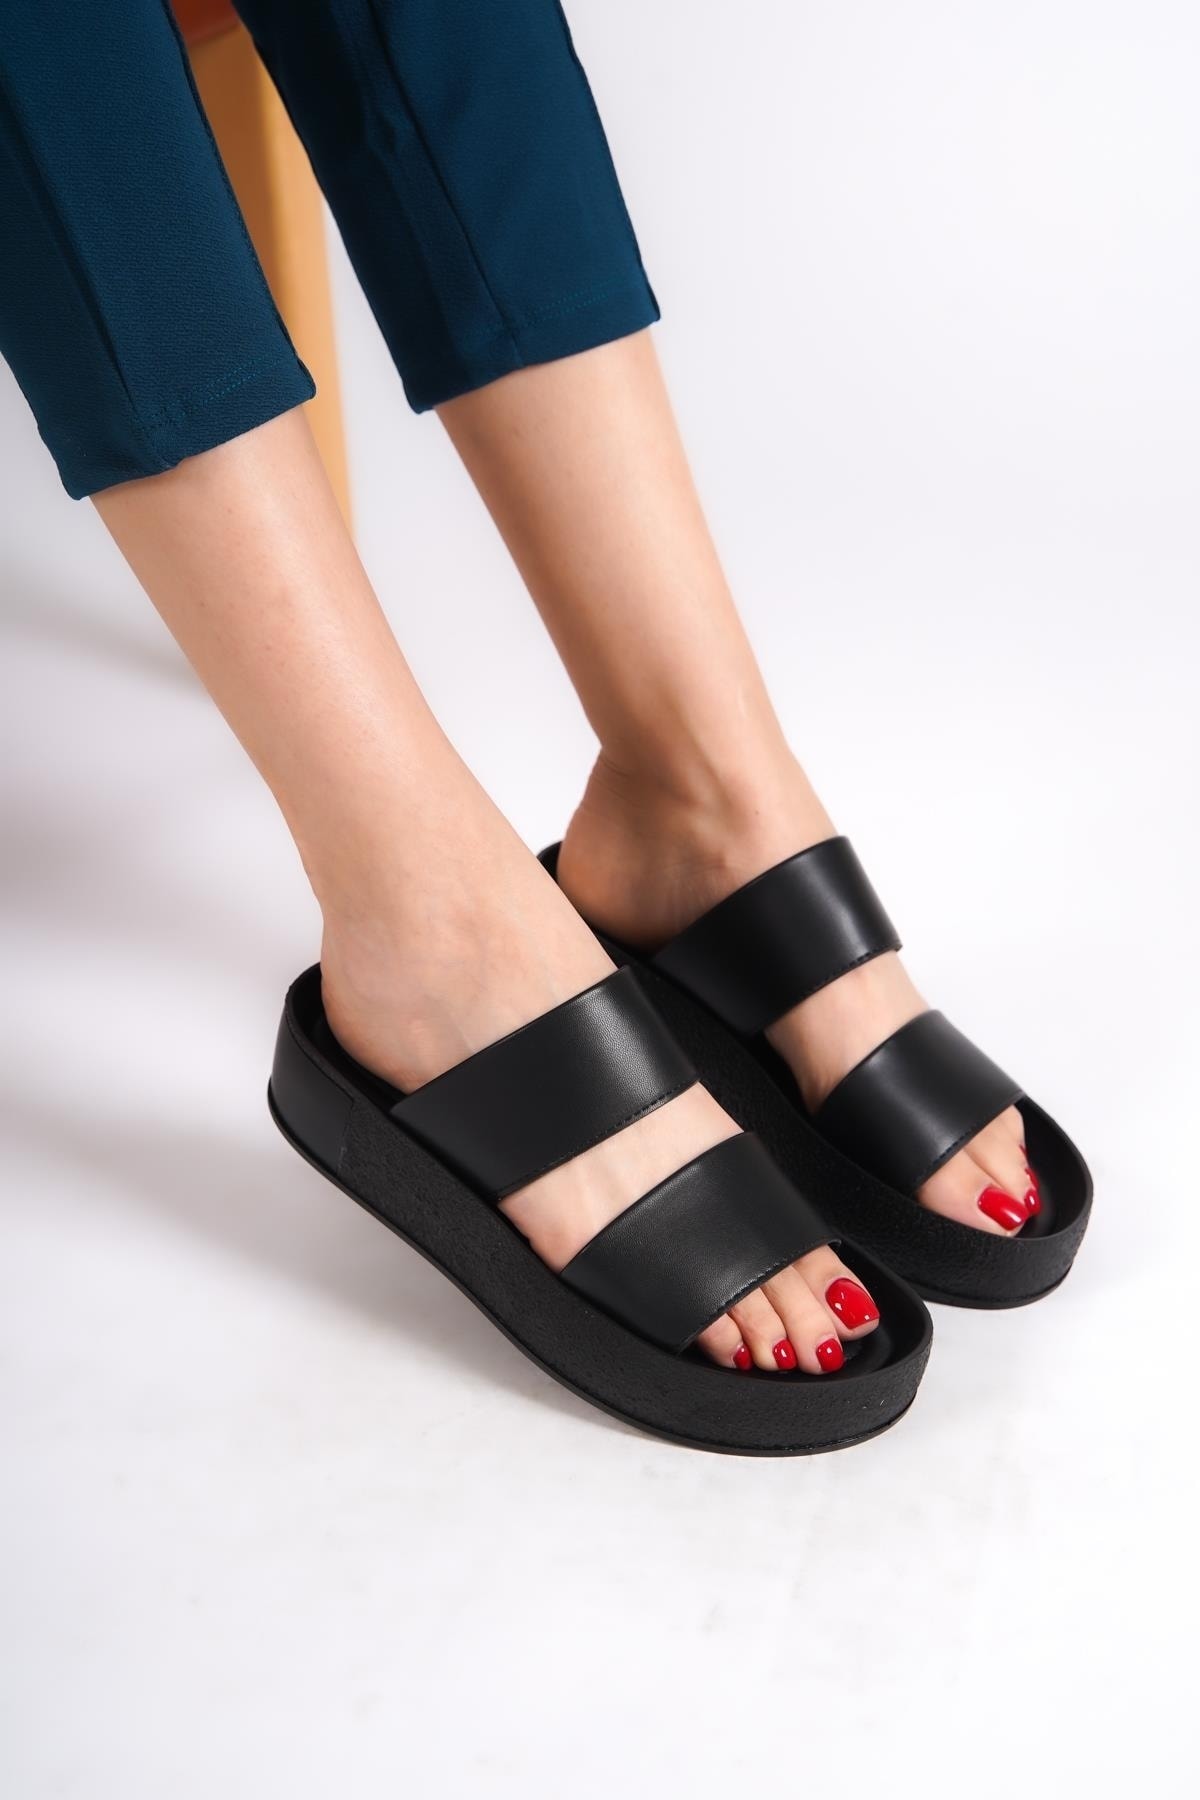 Capone Outfitters Capone Double Straps Colorful Detailed Wedge Heel Black Women's Slippers.